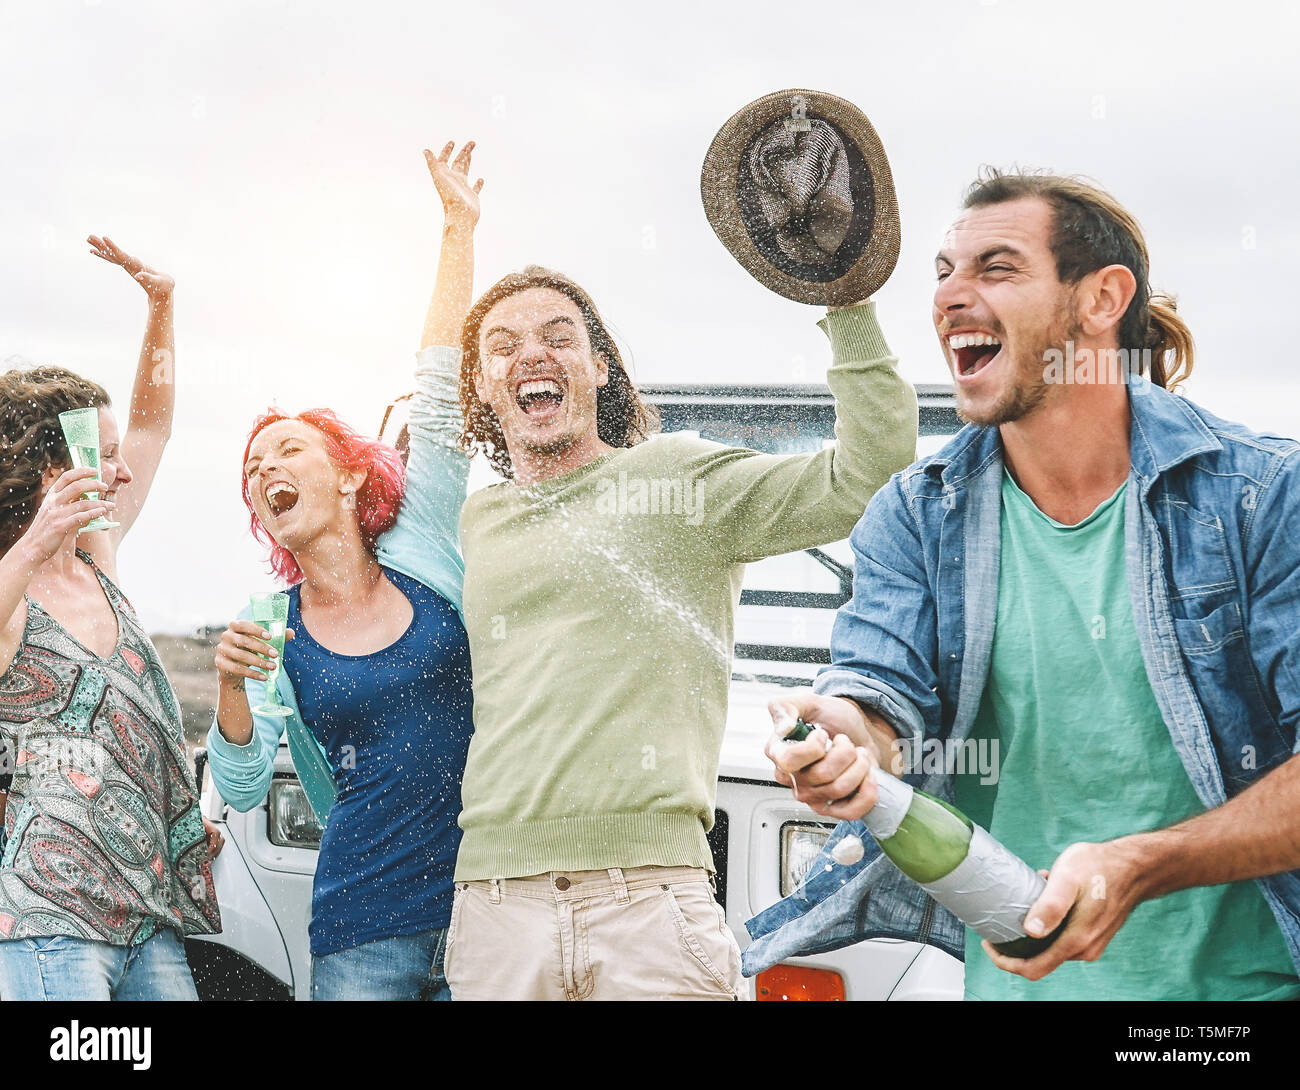 Group of happy friends making party with a bottle of champagne - Travel people having fun celebrating during their road trip with convertible car Stock Photo